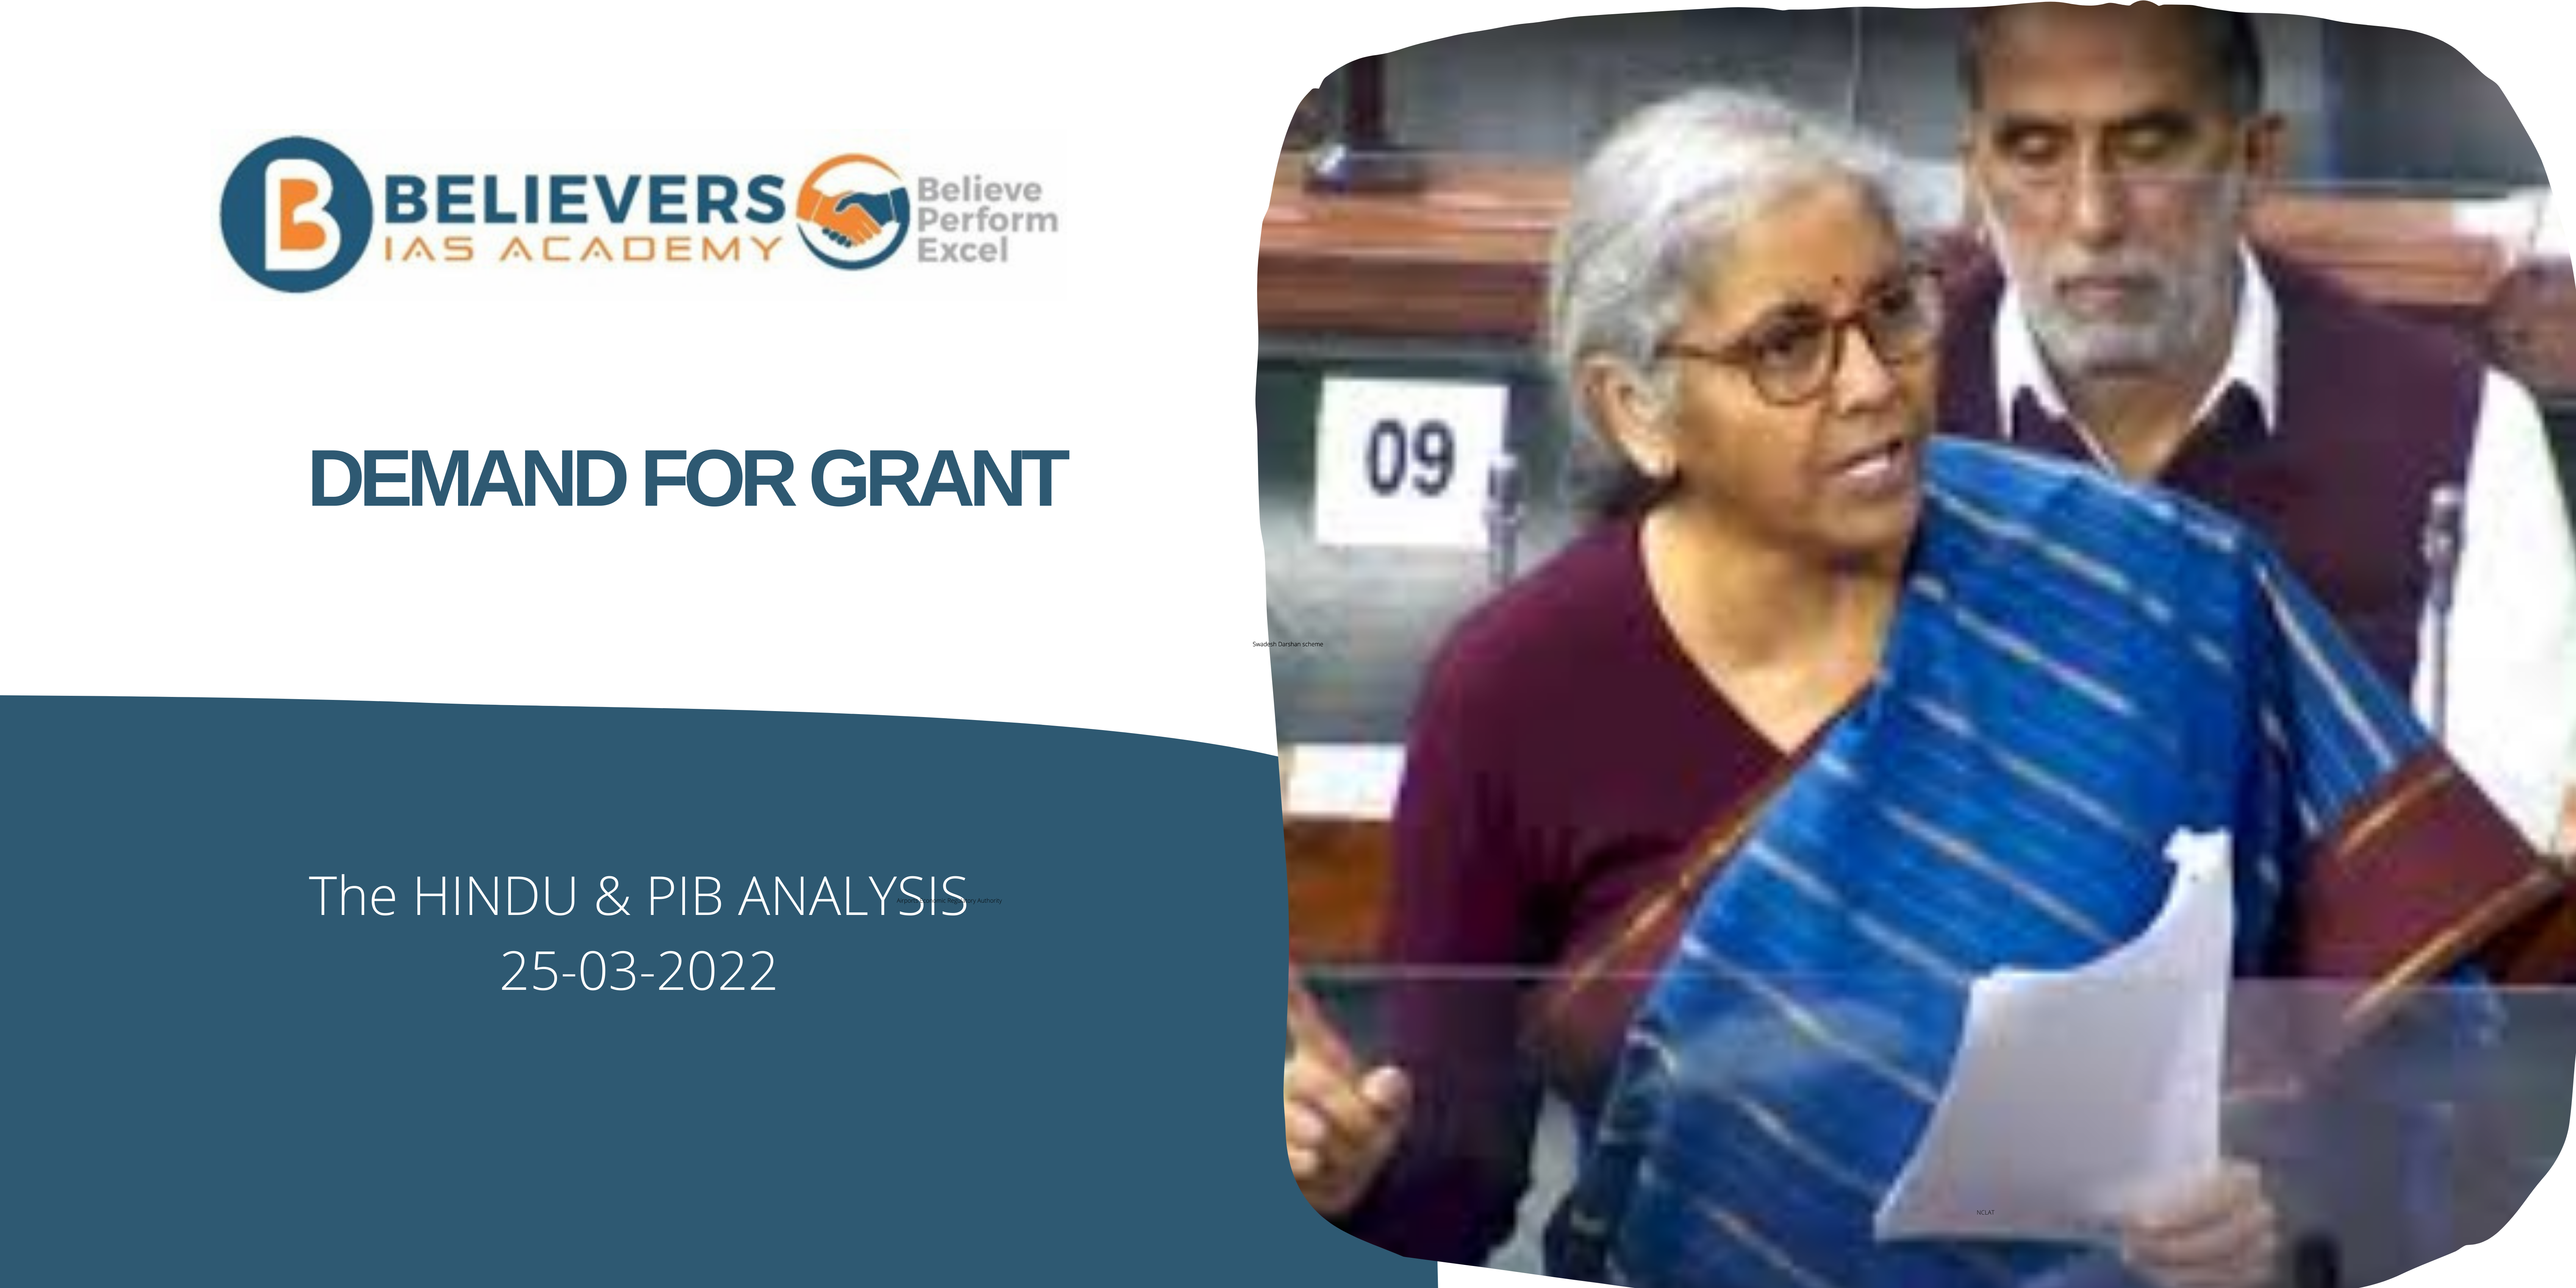 IAS Current affairs - Demand for Grant